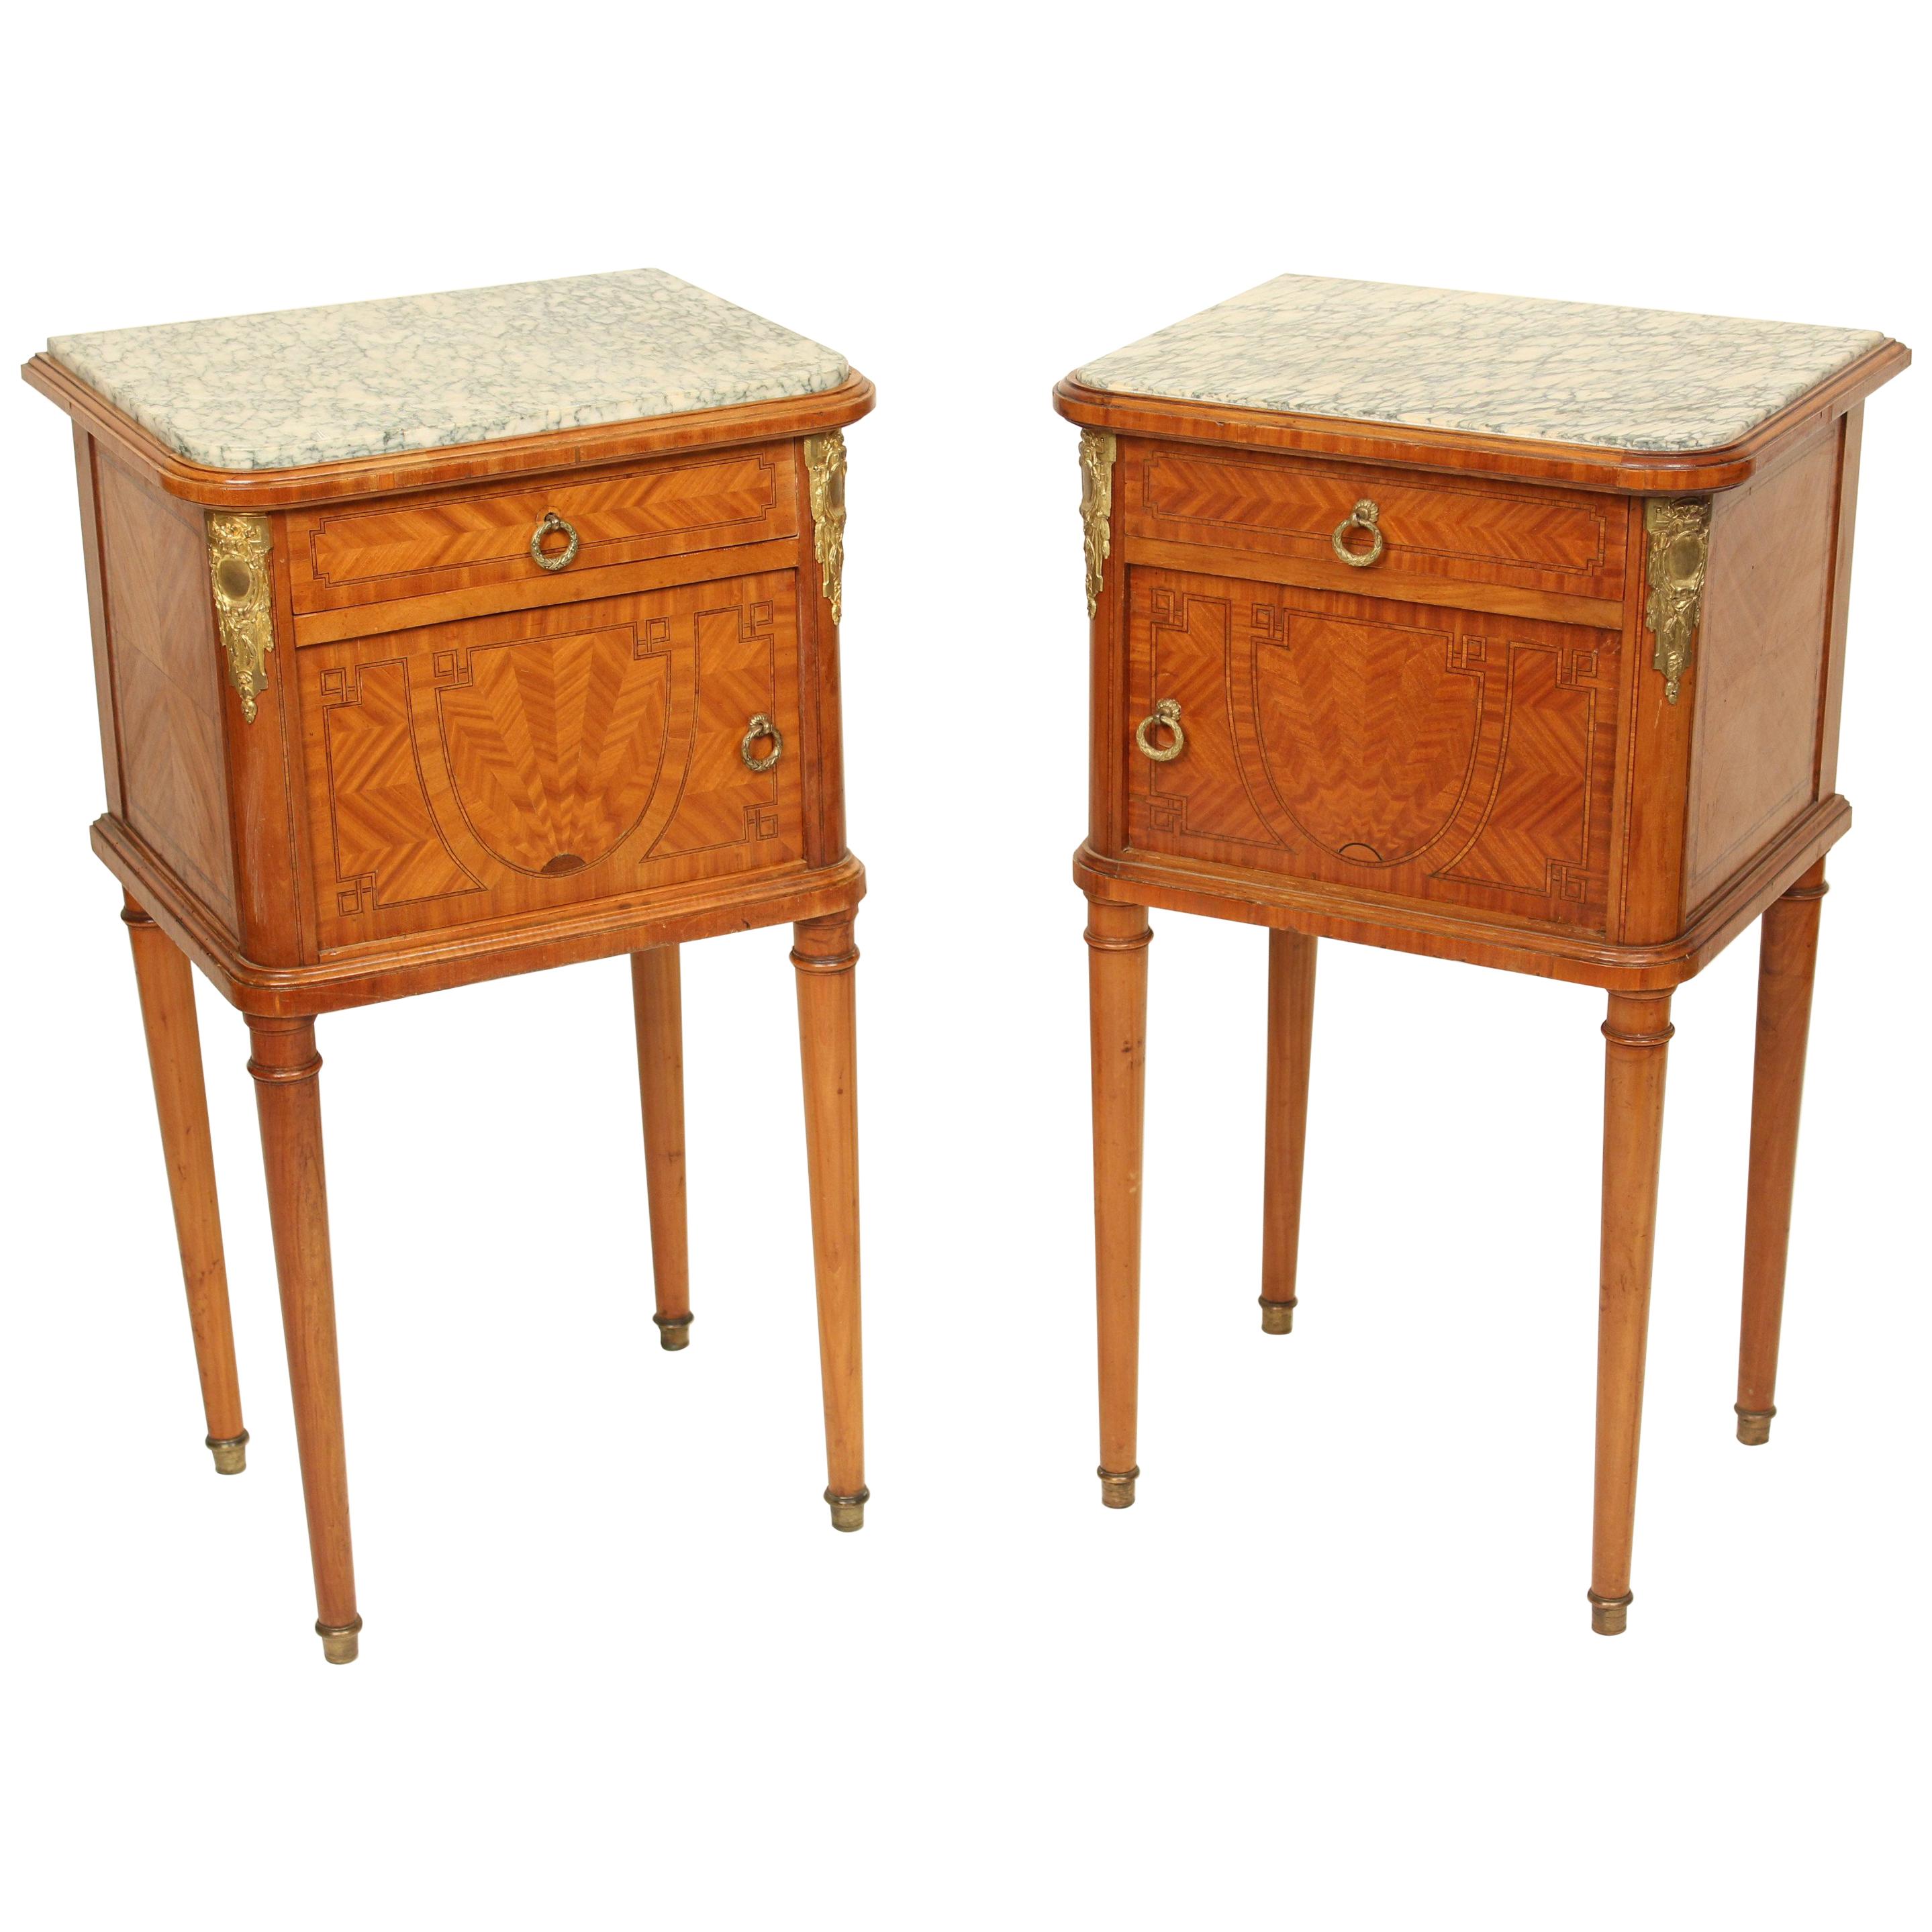 Pair of Louis XVI Style Occasional Tables